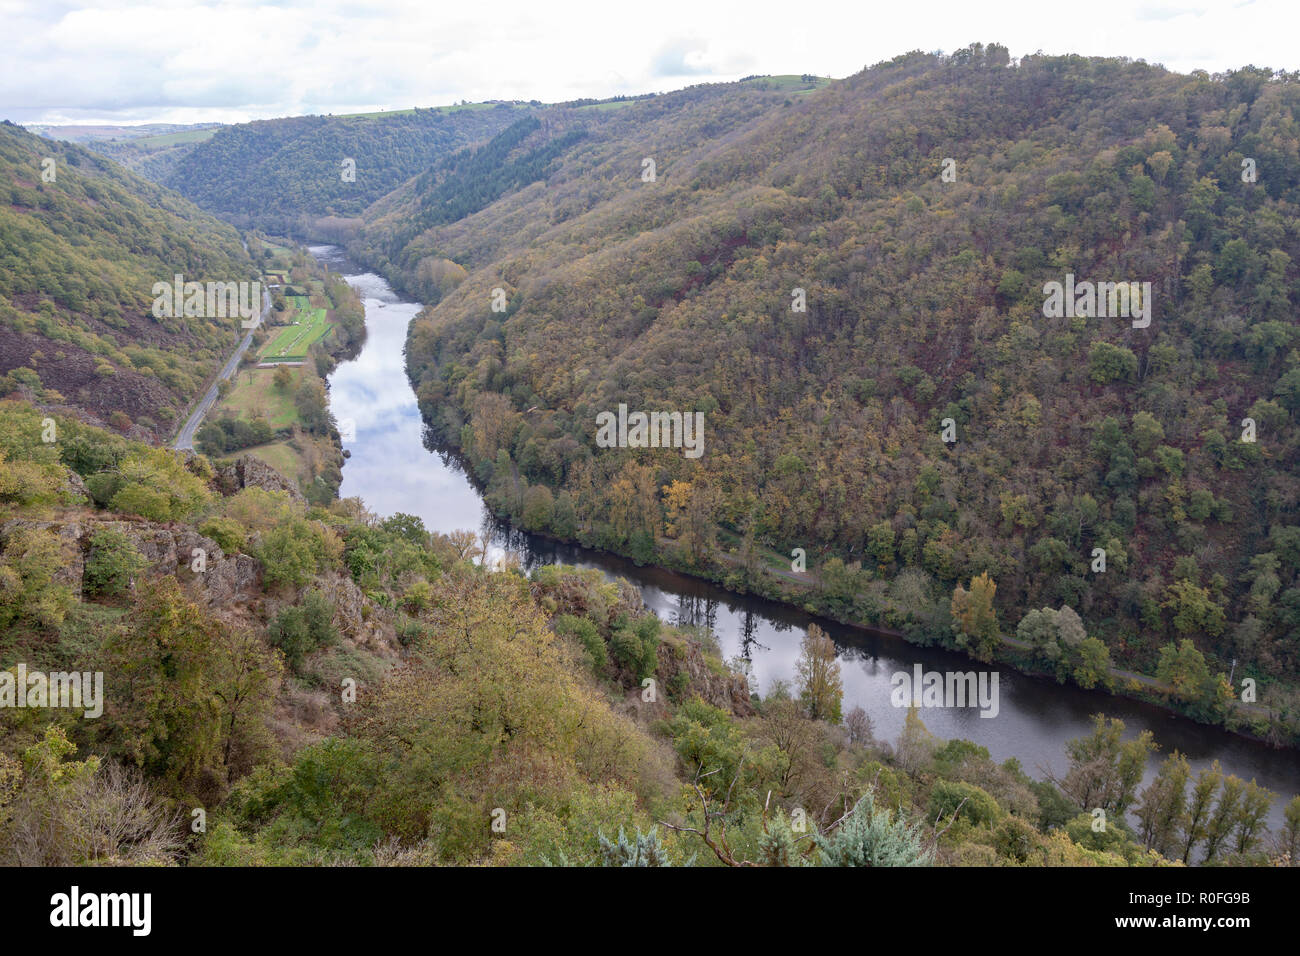 The valley of the Lot river, in Autumn (Saint Parthem - Aveyron- Midi Pyrenees - France), upstream from the castle of Gironde which overlhangs it. Stock Photo